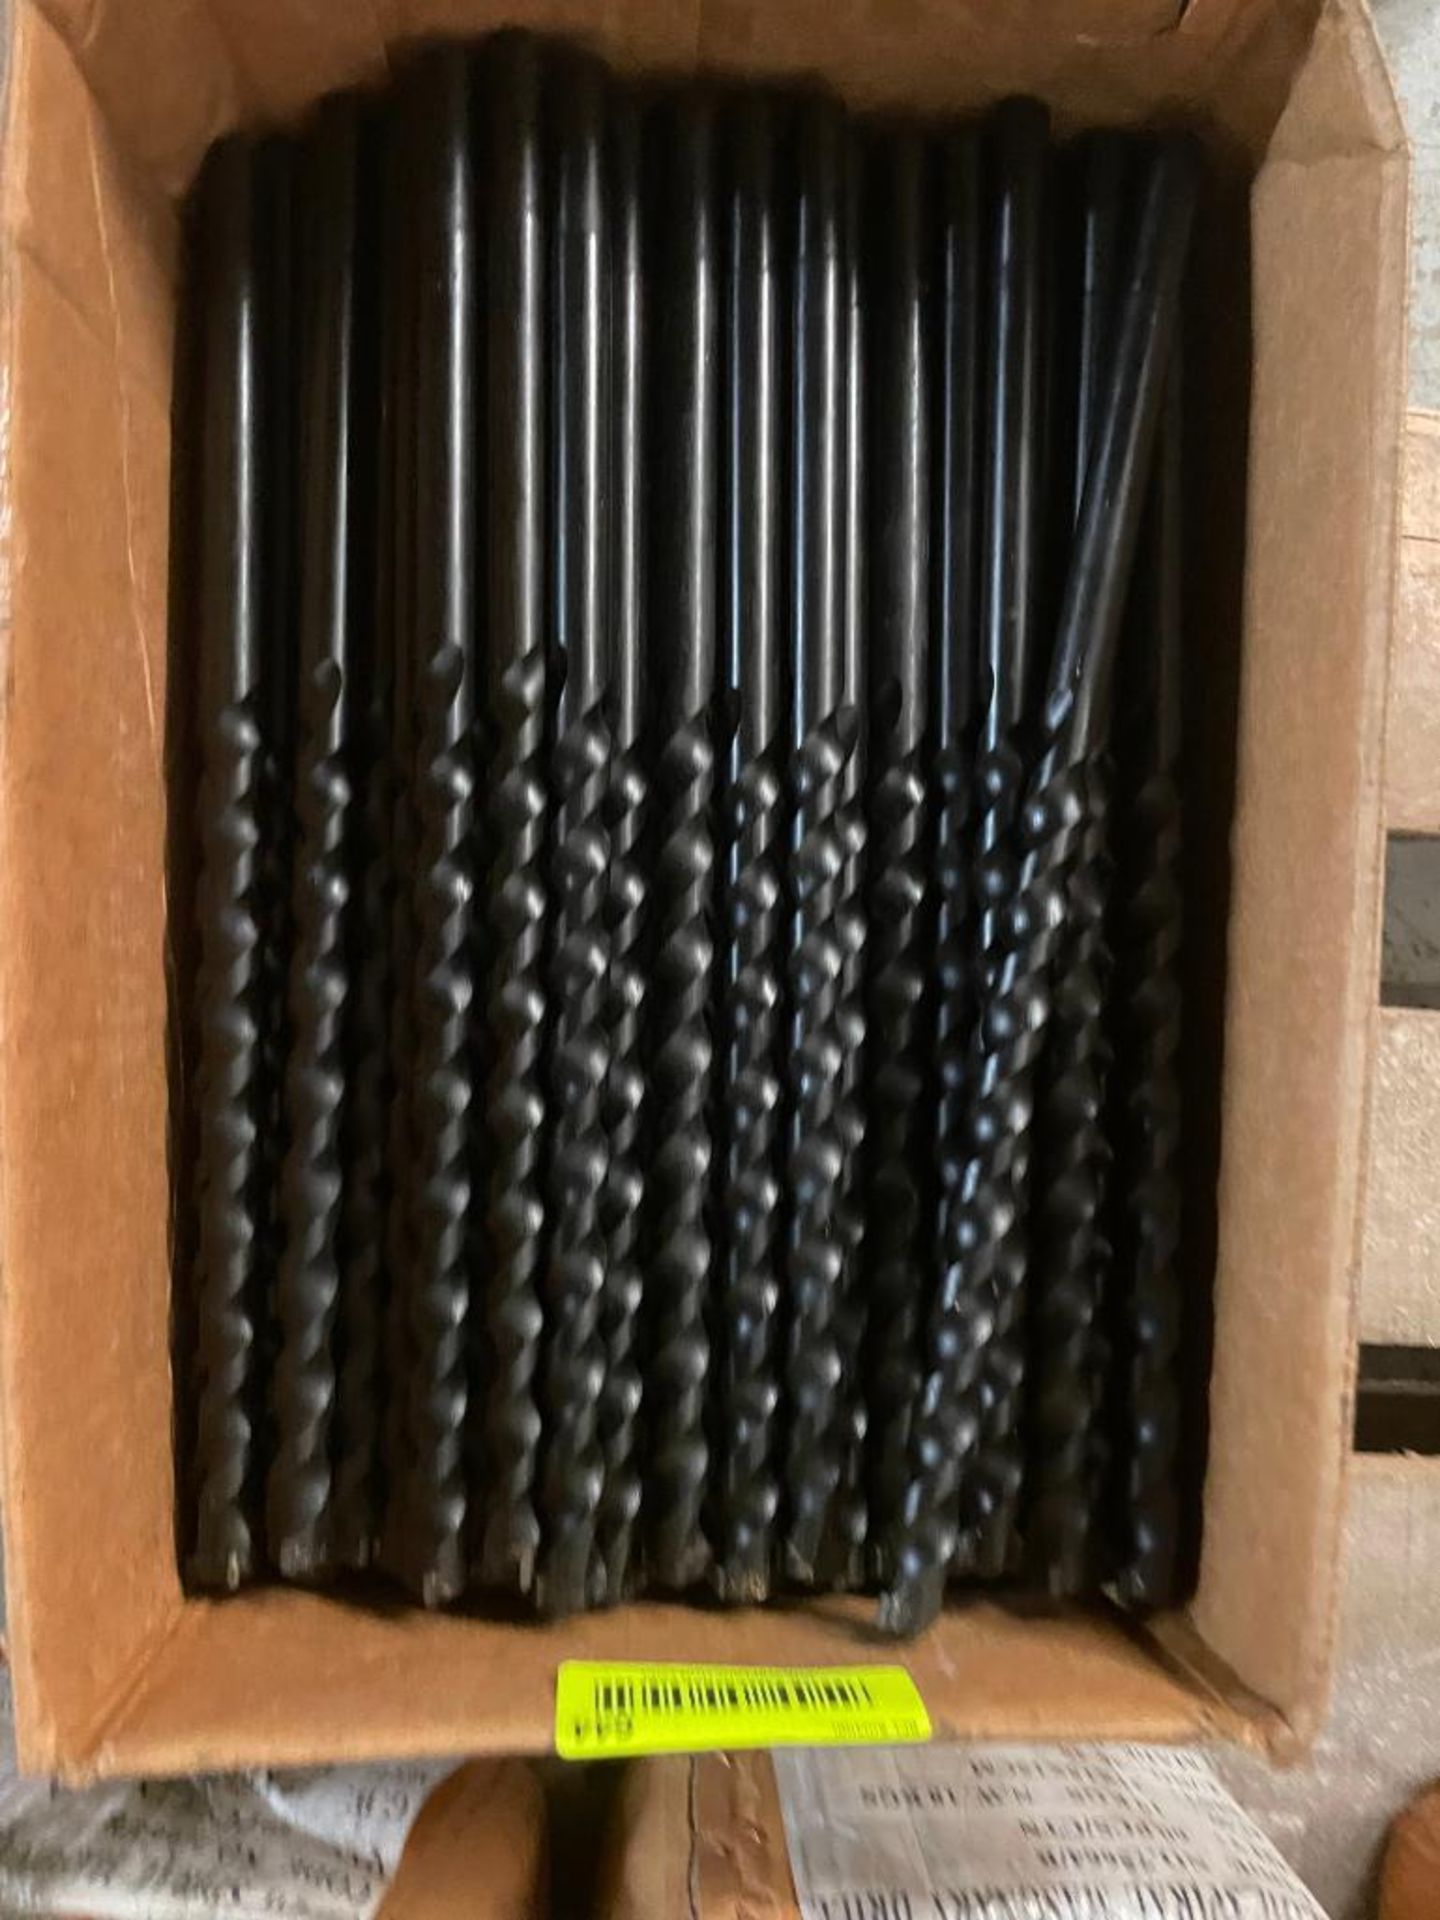 4000CT 2" R3 SQUARE RECESS 1/4" HEX POWER BITS BRAND/MODEL EAZYPOWER 32102 ADDITIONAL INFO TOTAL LOT - Image 3 of 3